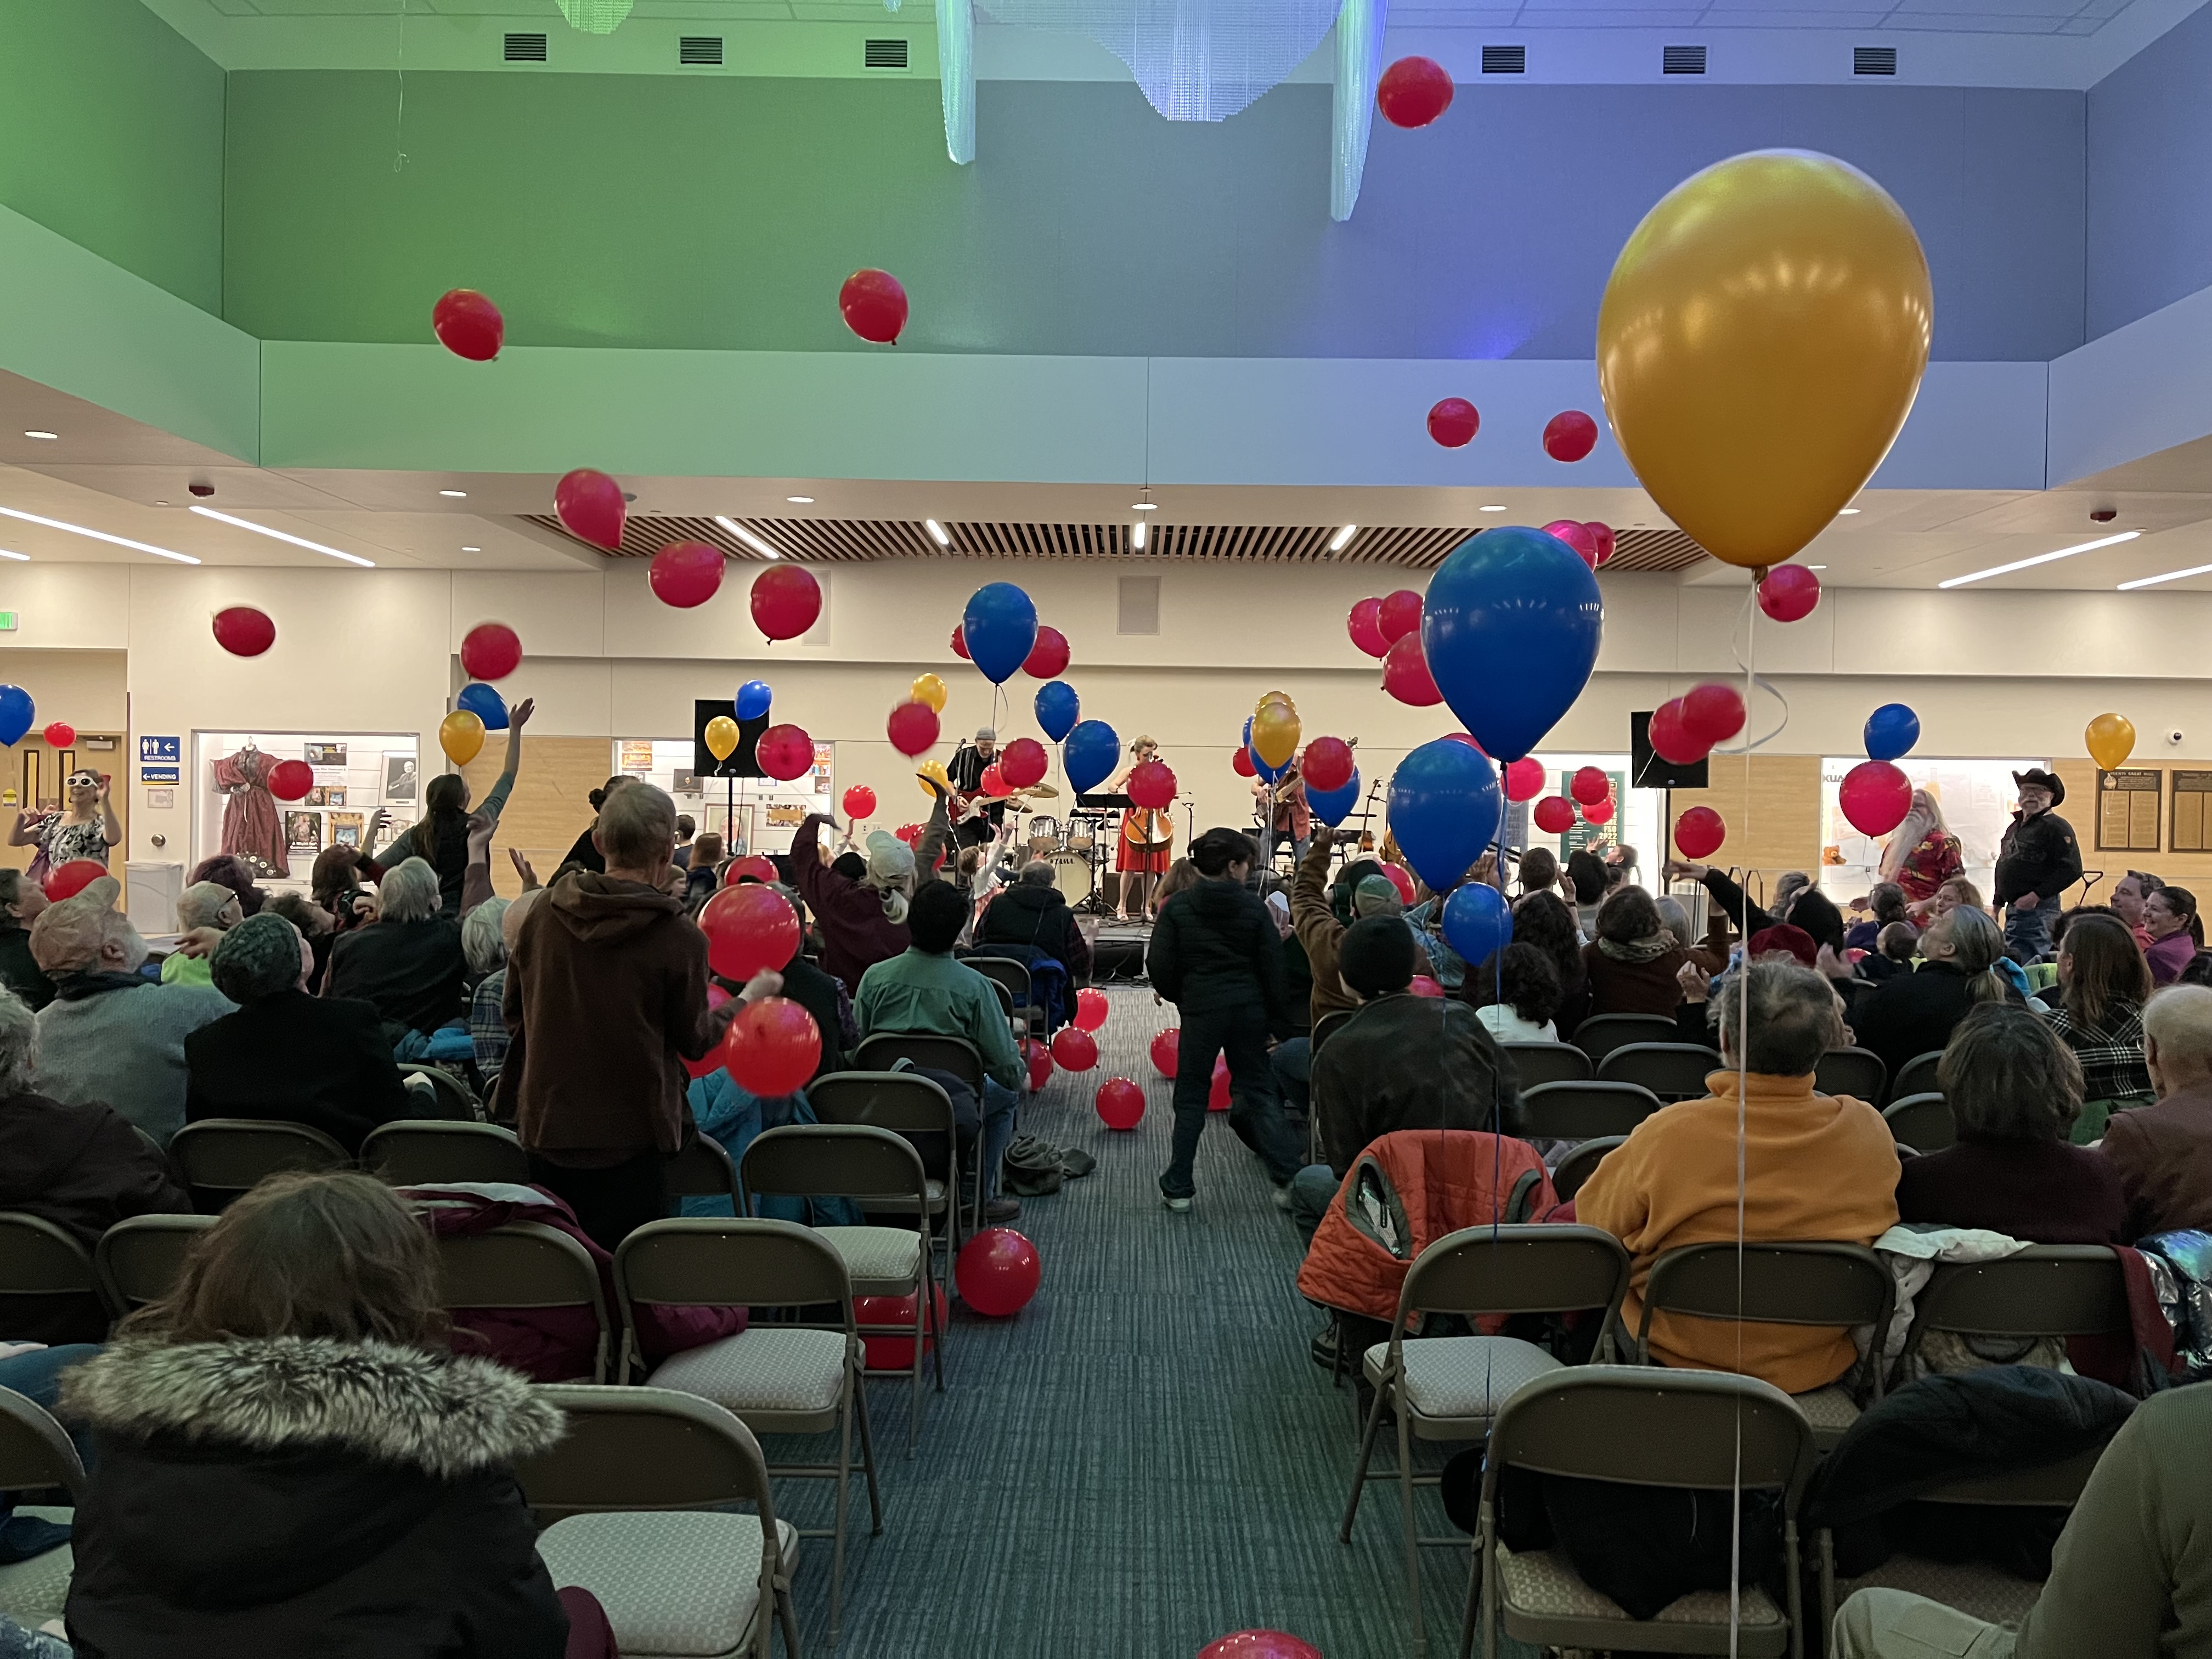 photo shot from the back of an audience towards a stage of musicians, with red, blue and gold helium balloons